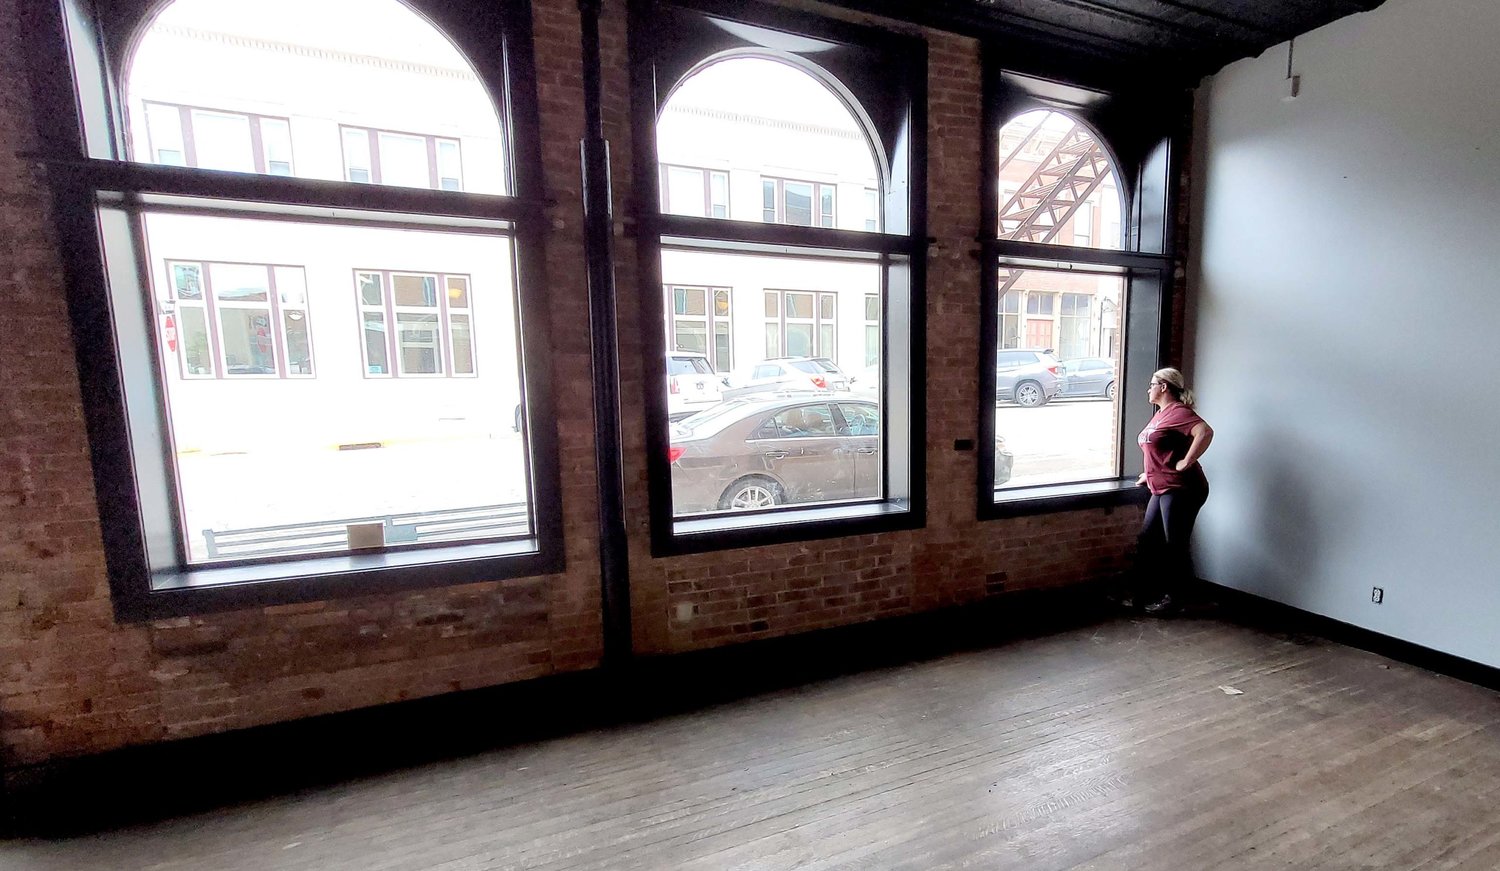 Angela Hedges looks out the windows at her new location in the Hesse Building at 7th and Avenue G in Fort Madison. Hedges is planning to open Corks and Barrels in July downtown. Photo by Chuck Vandenberg/PCC